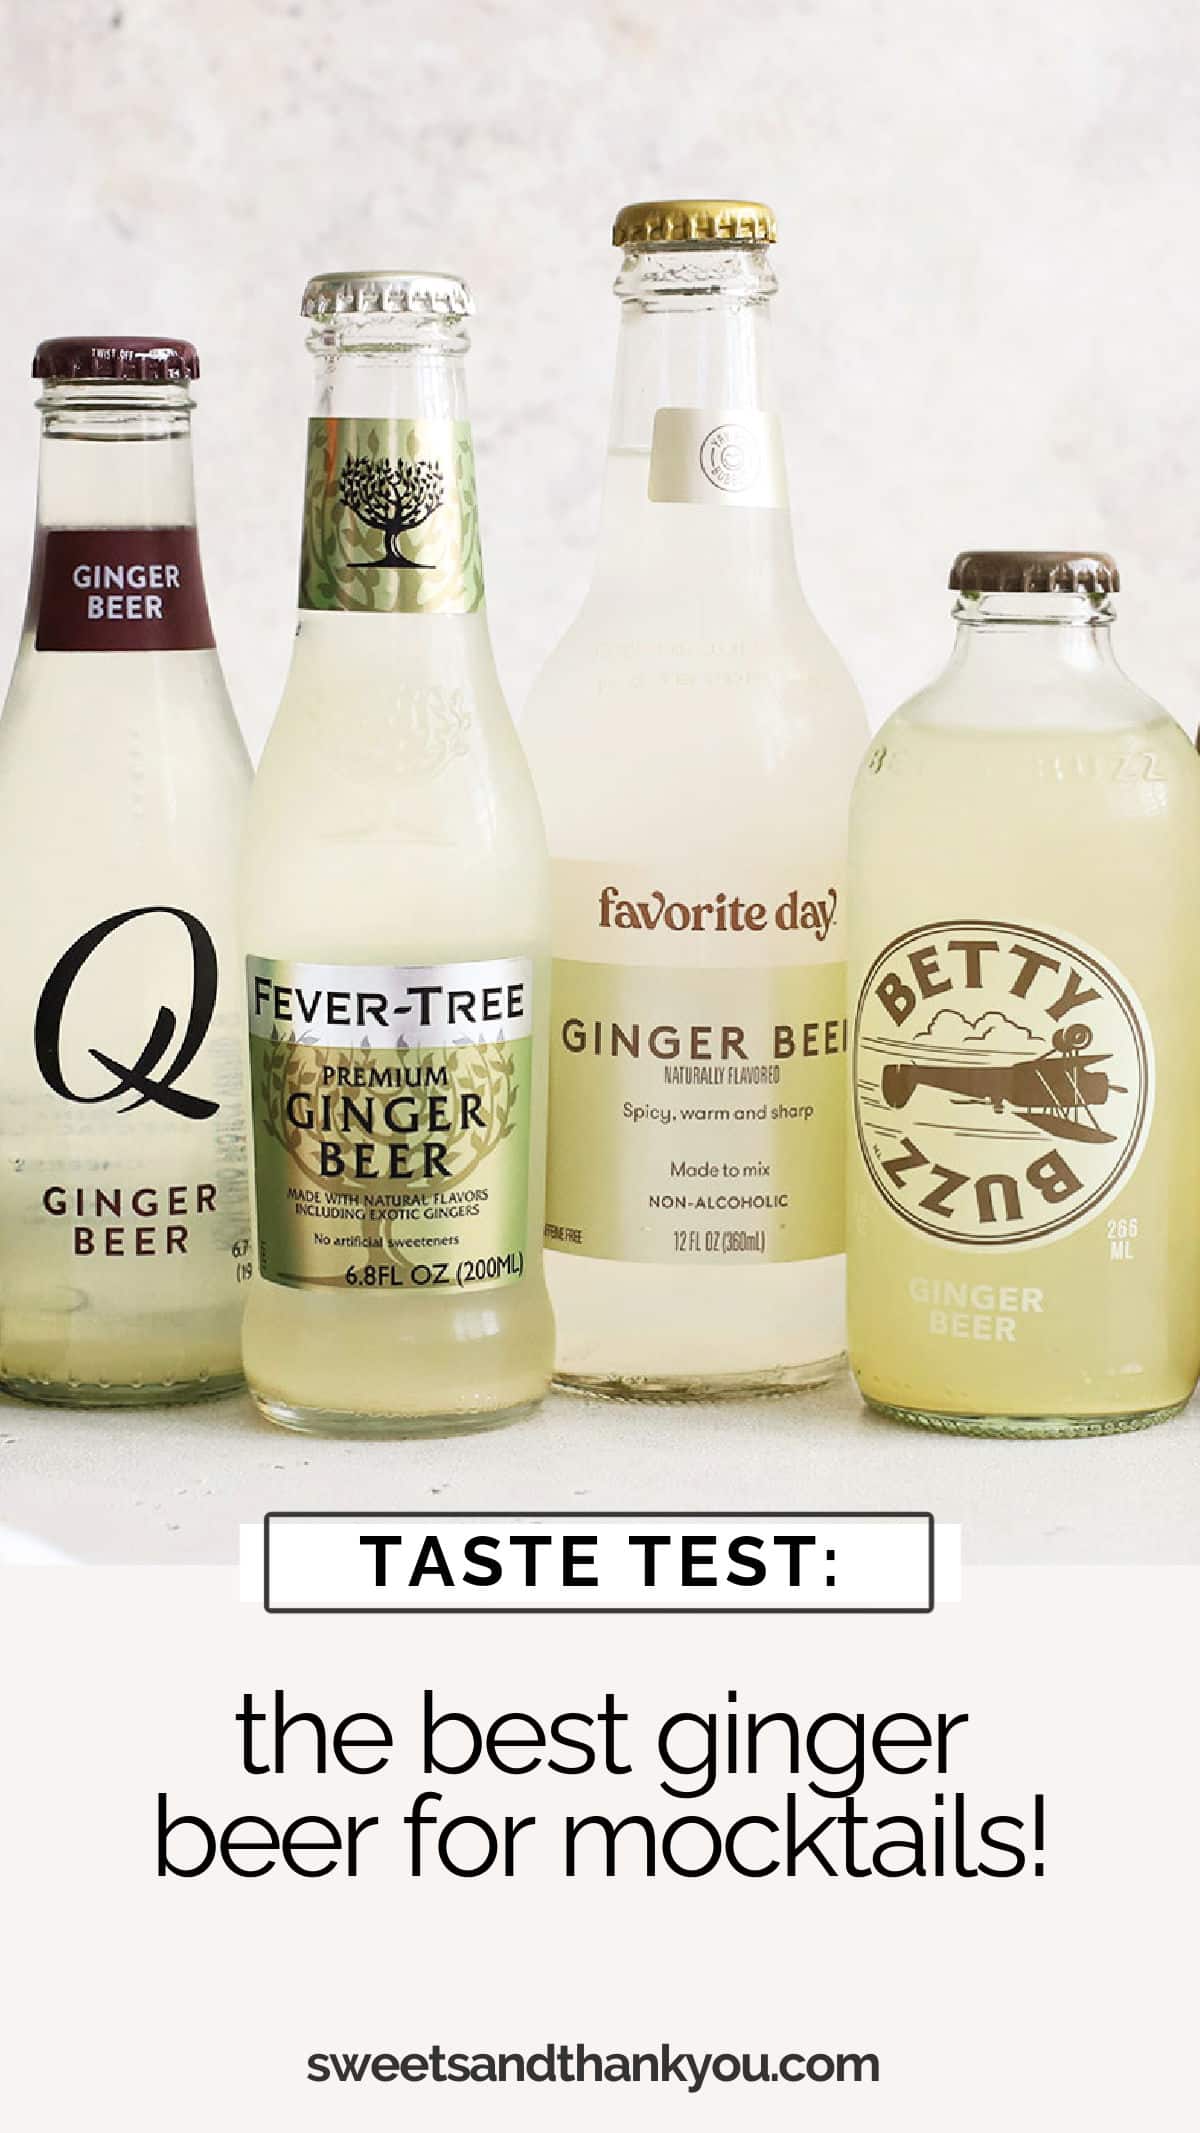 The Best Ginger Beer For Mocktails - What's the best brand of ginger beer? We put six popular brands to the test to find the best one! // best ginger beer for mocktails // best ginger beer for cocktail / ginger beer taste test / ginger beer vs ginger ale / are ginger beer and ginger ale the same thing / what's the difference between ginger beer and ginger ale / ginger beer mocktails / best brand of ginger beer